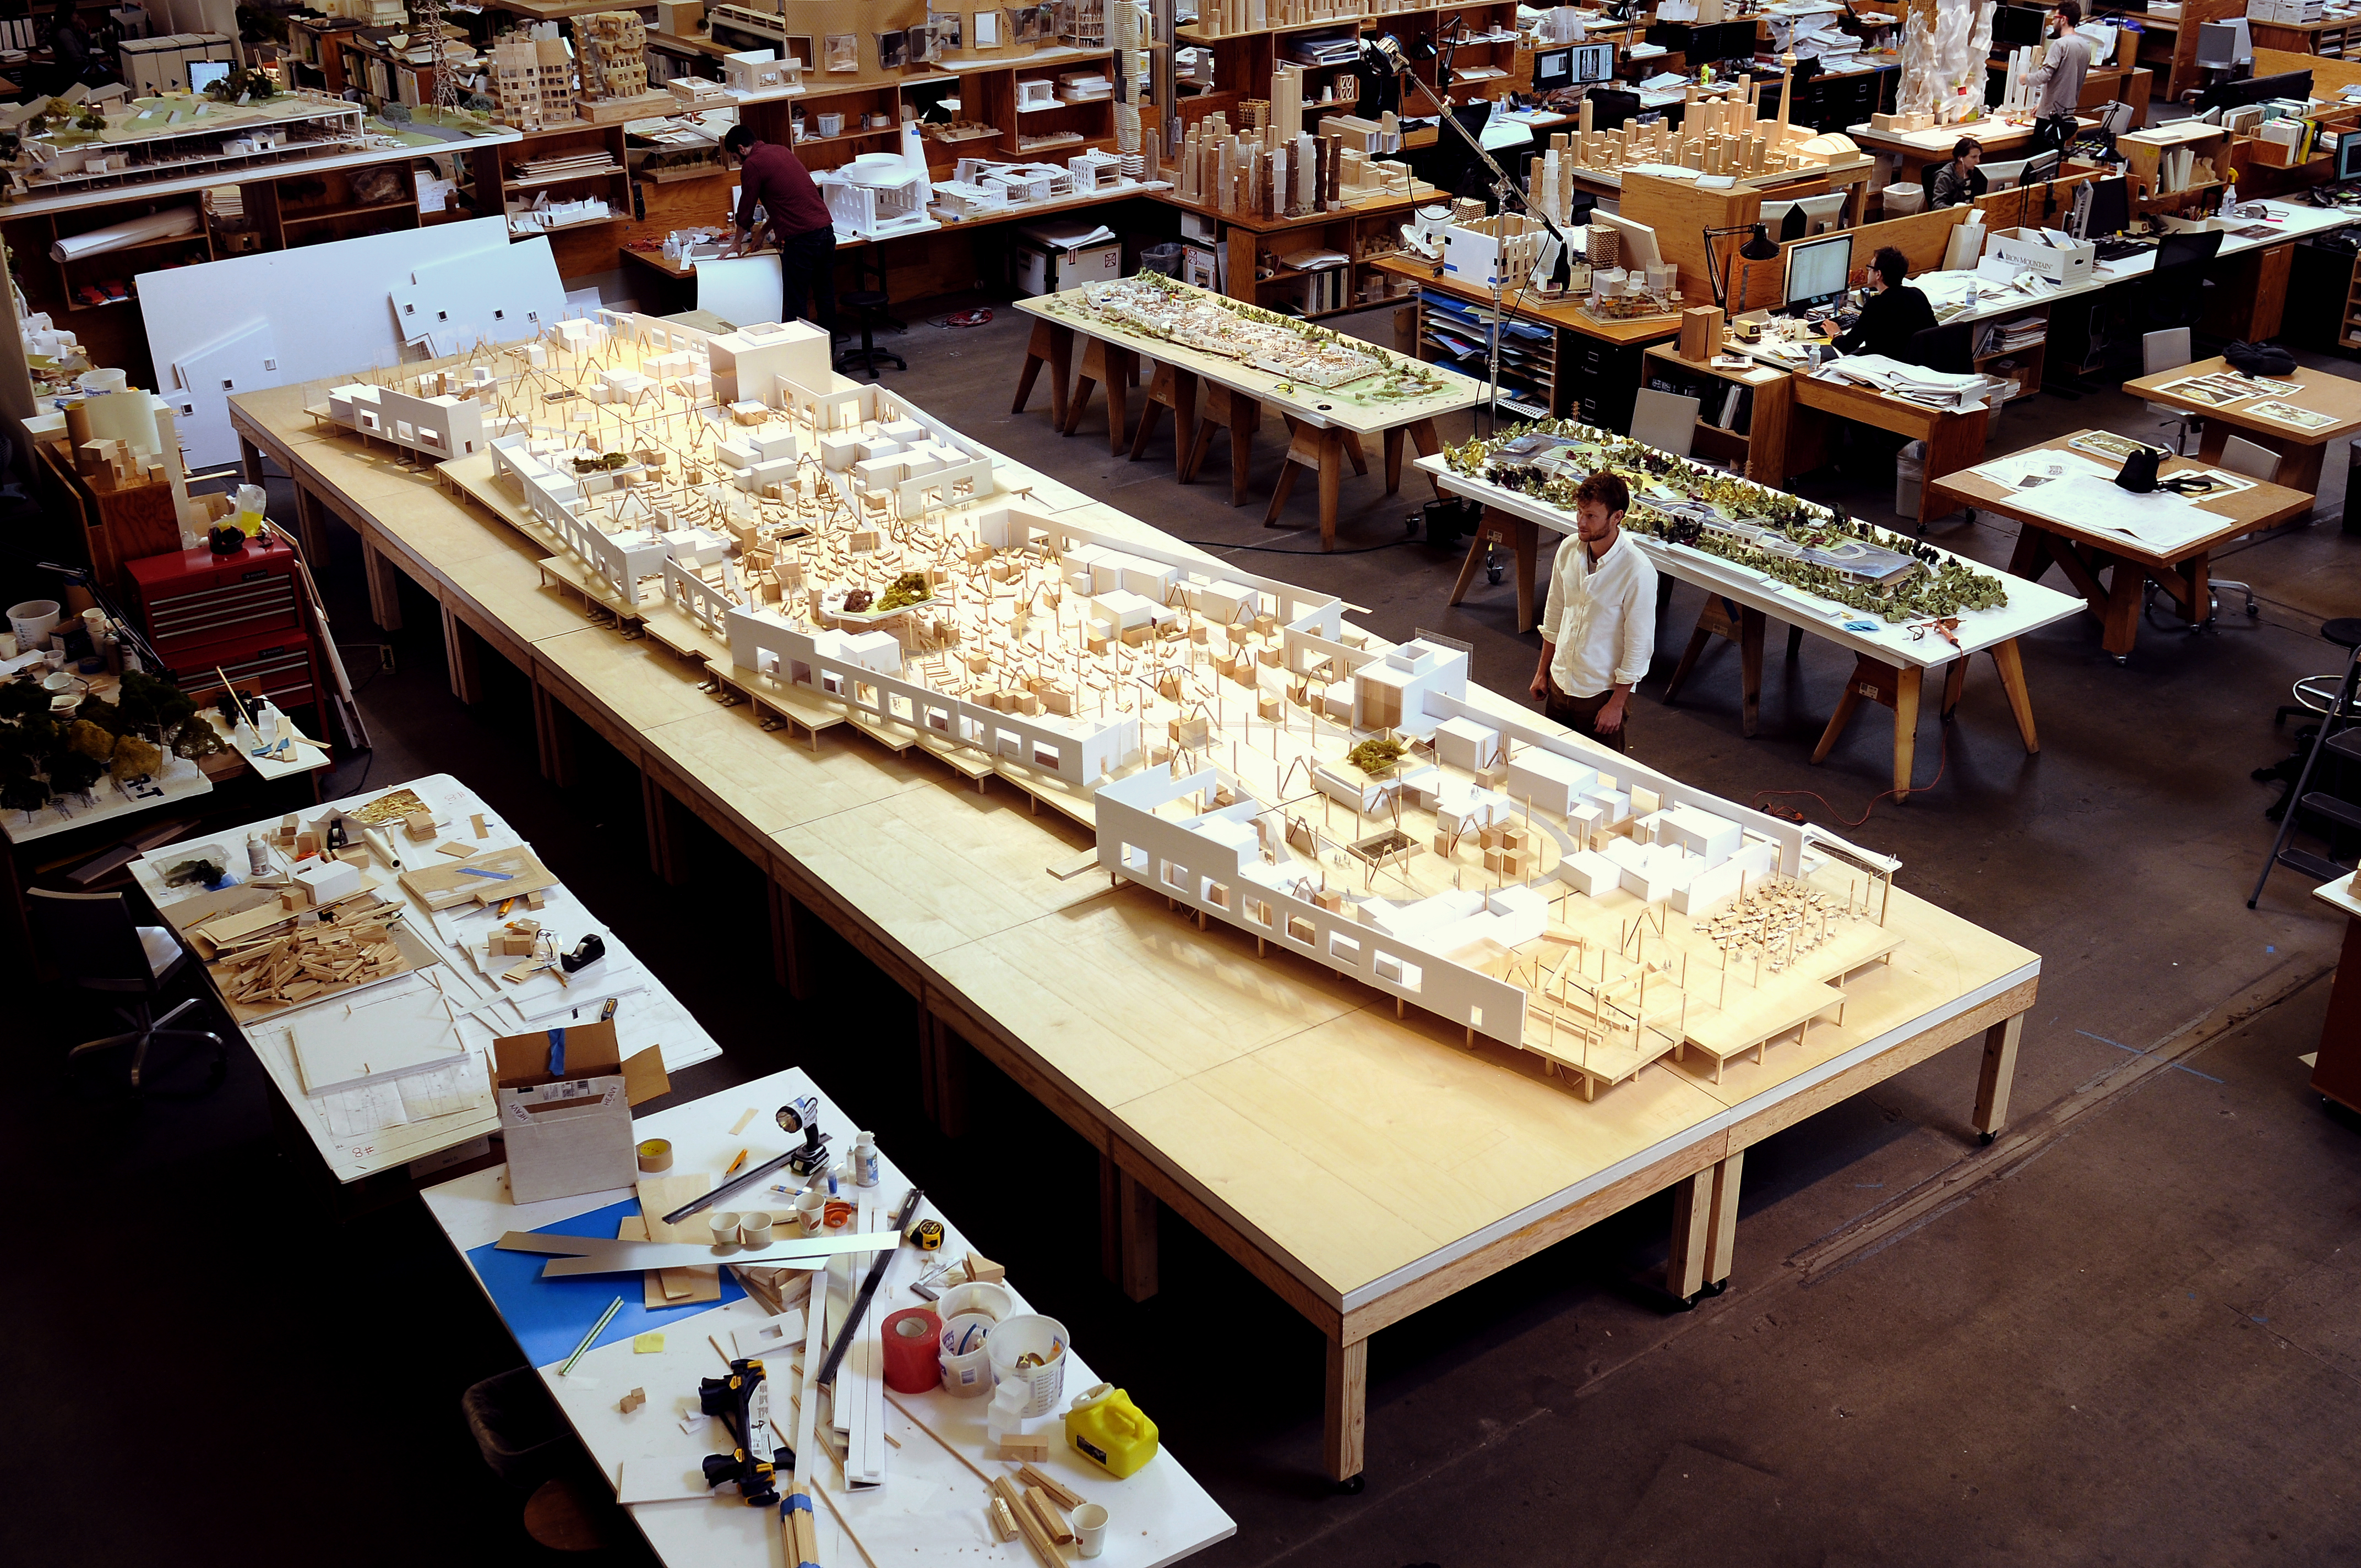 An early architectural model in the offices of world-renowned architect Frank Gehry.